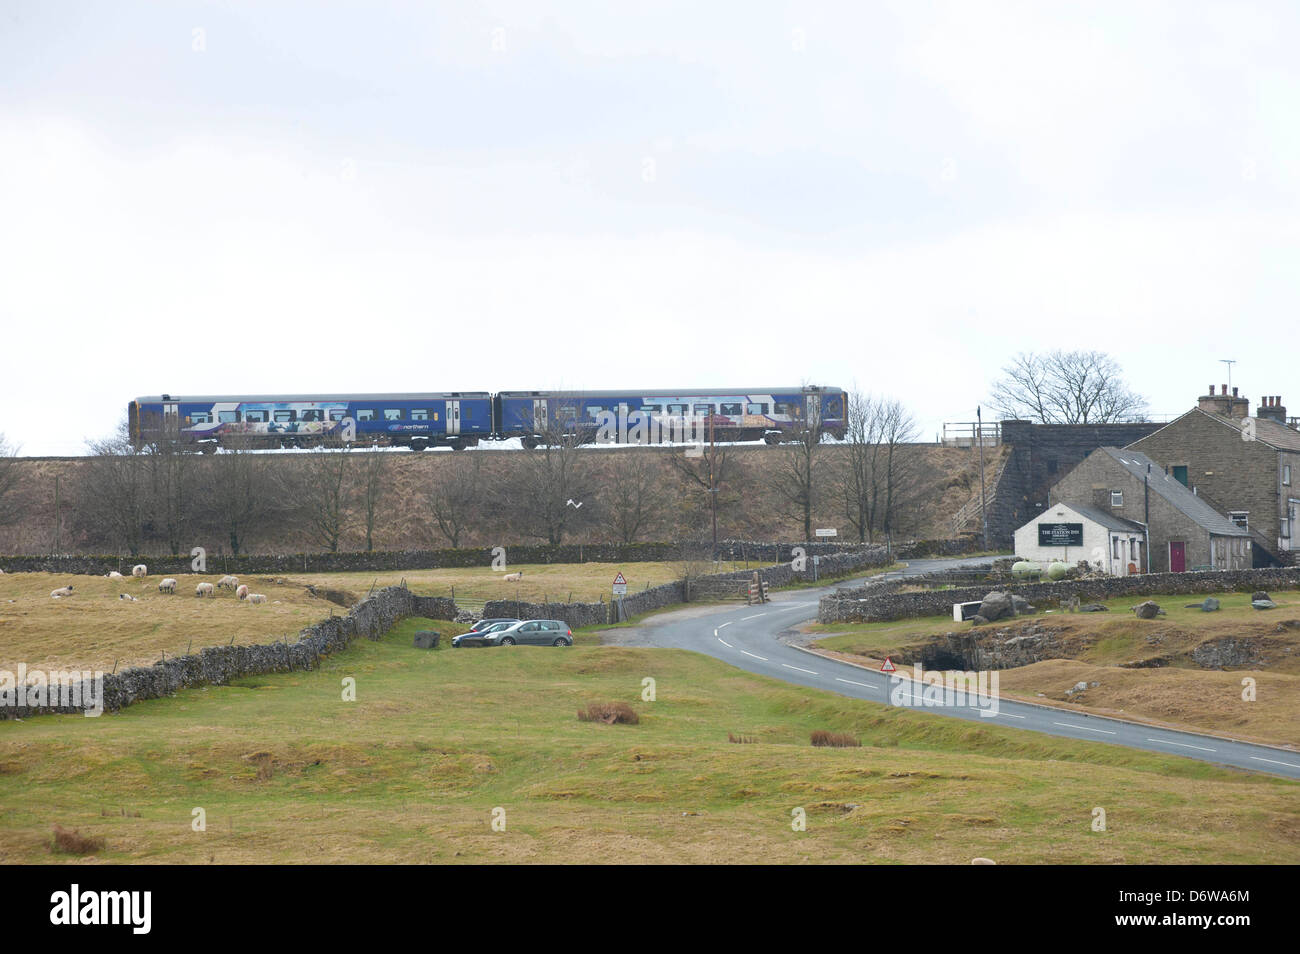 Northern rail train in West Yorkshire livery on embankment approaching Ribblehead viaduct Stock Photo